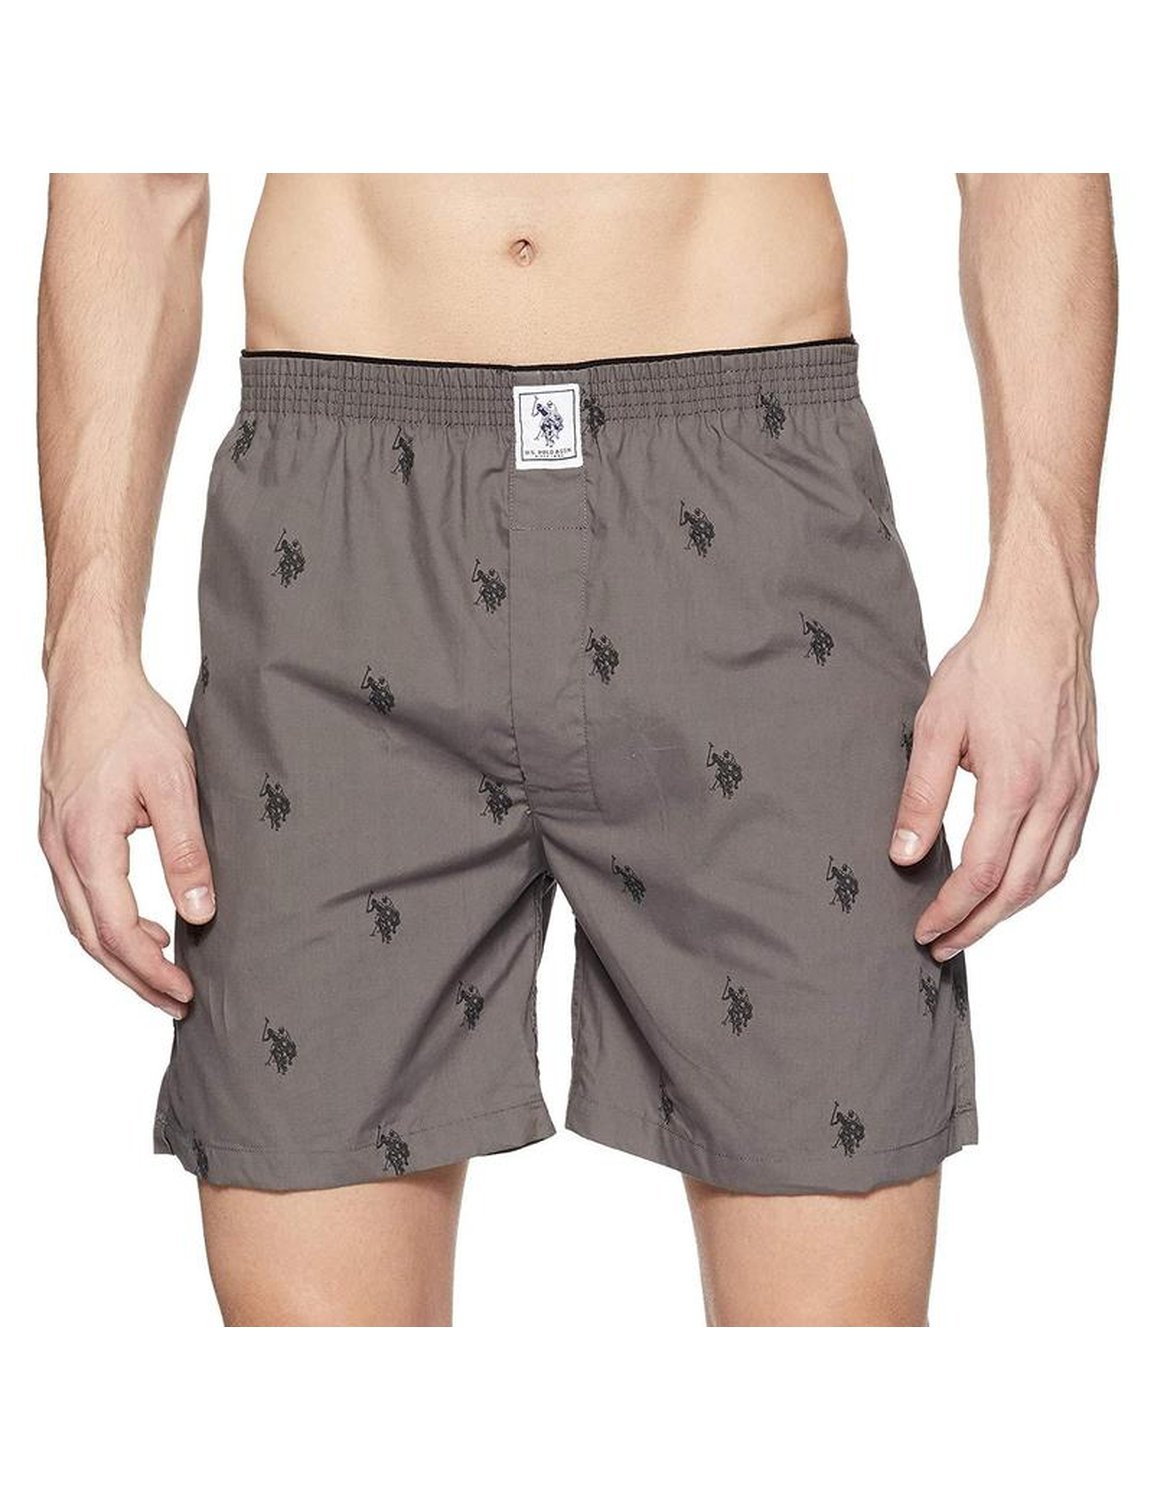 US Polo Men's Grey Pure Cotton Printed Boxers Shorts with Pockets - Stilento